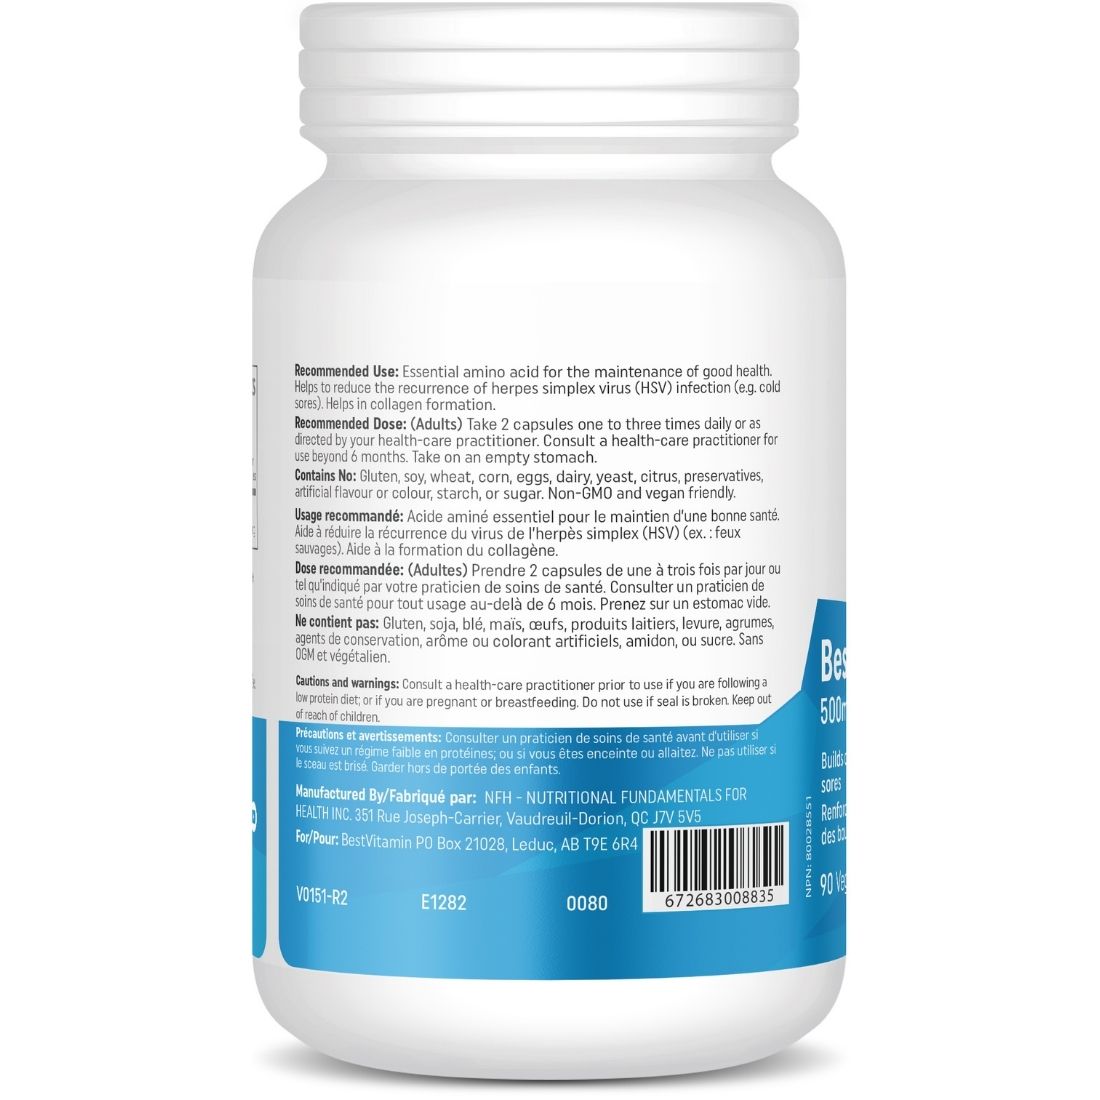 BestVitamin Best L-Lysine, 500mg, Builds Collagen & Reduces Cold Sores, 90 Vegetable Capsules, Clearance 50% Off, Final Sale